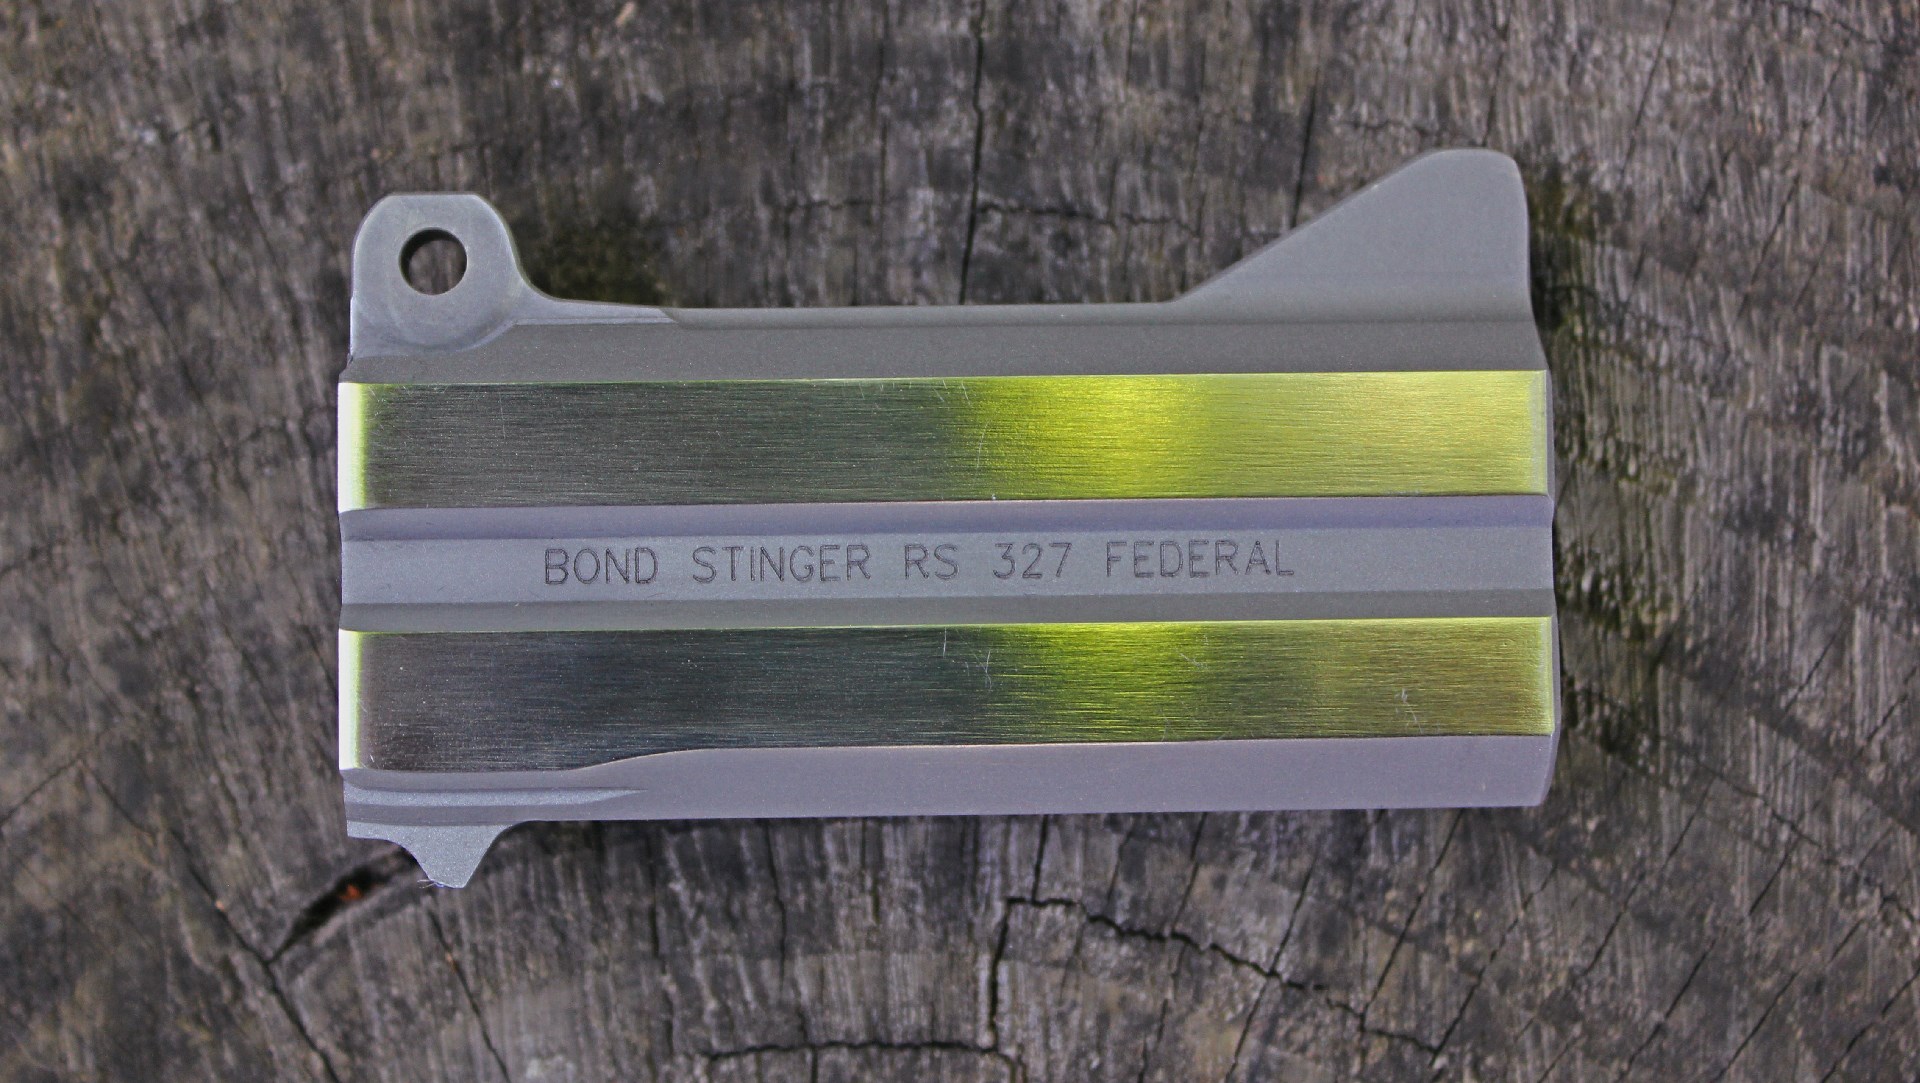 Bond Arms Stinger RS 3" barrel stainless steel assembly on wood long Stinger RS 3” barrels chambered in .327 Fed. Mag. are available as special order items.